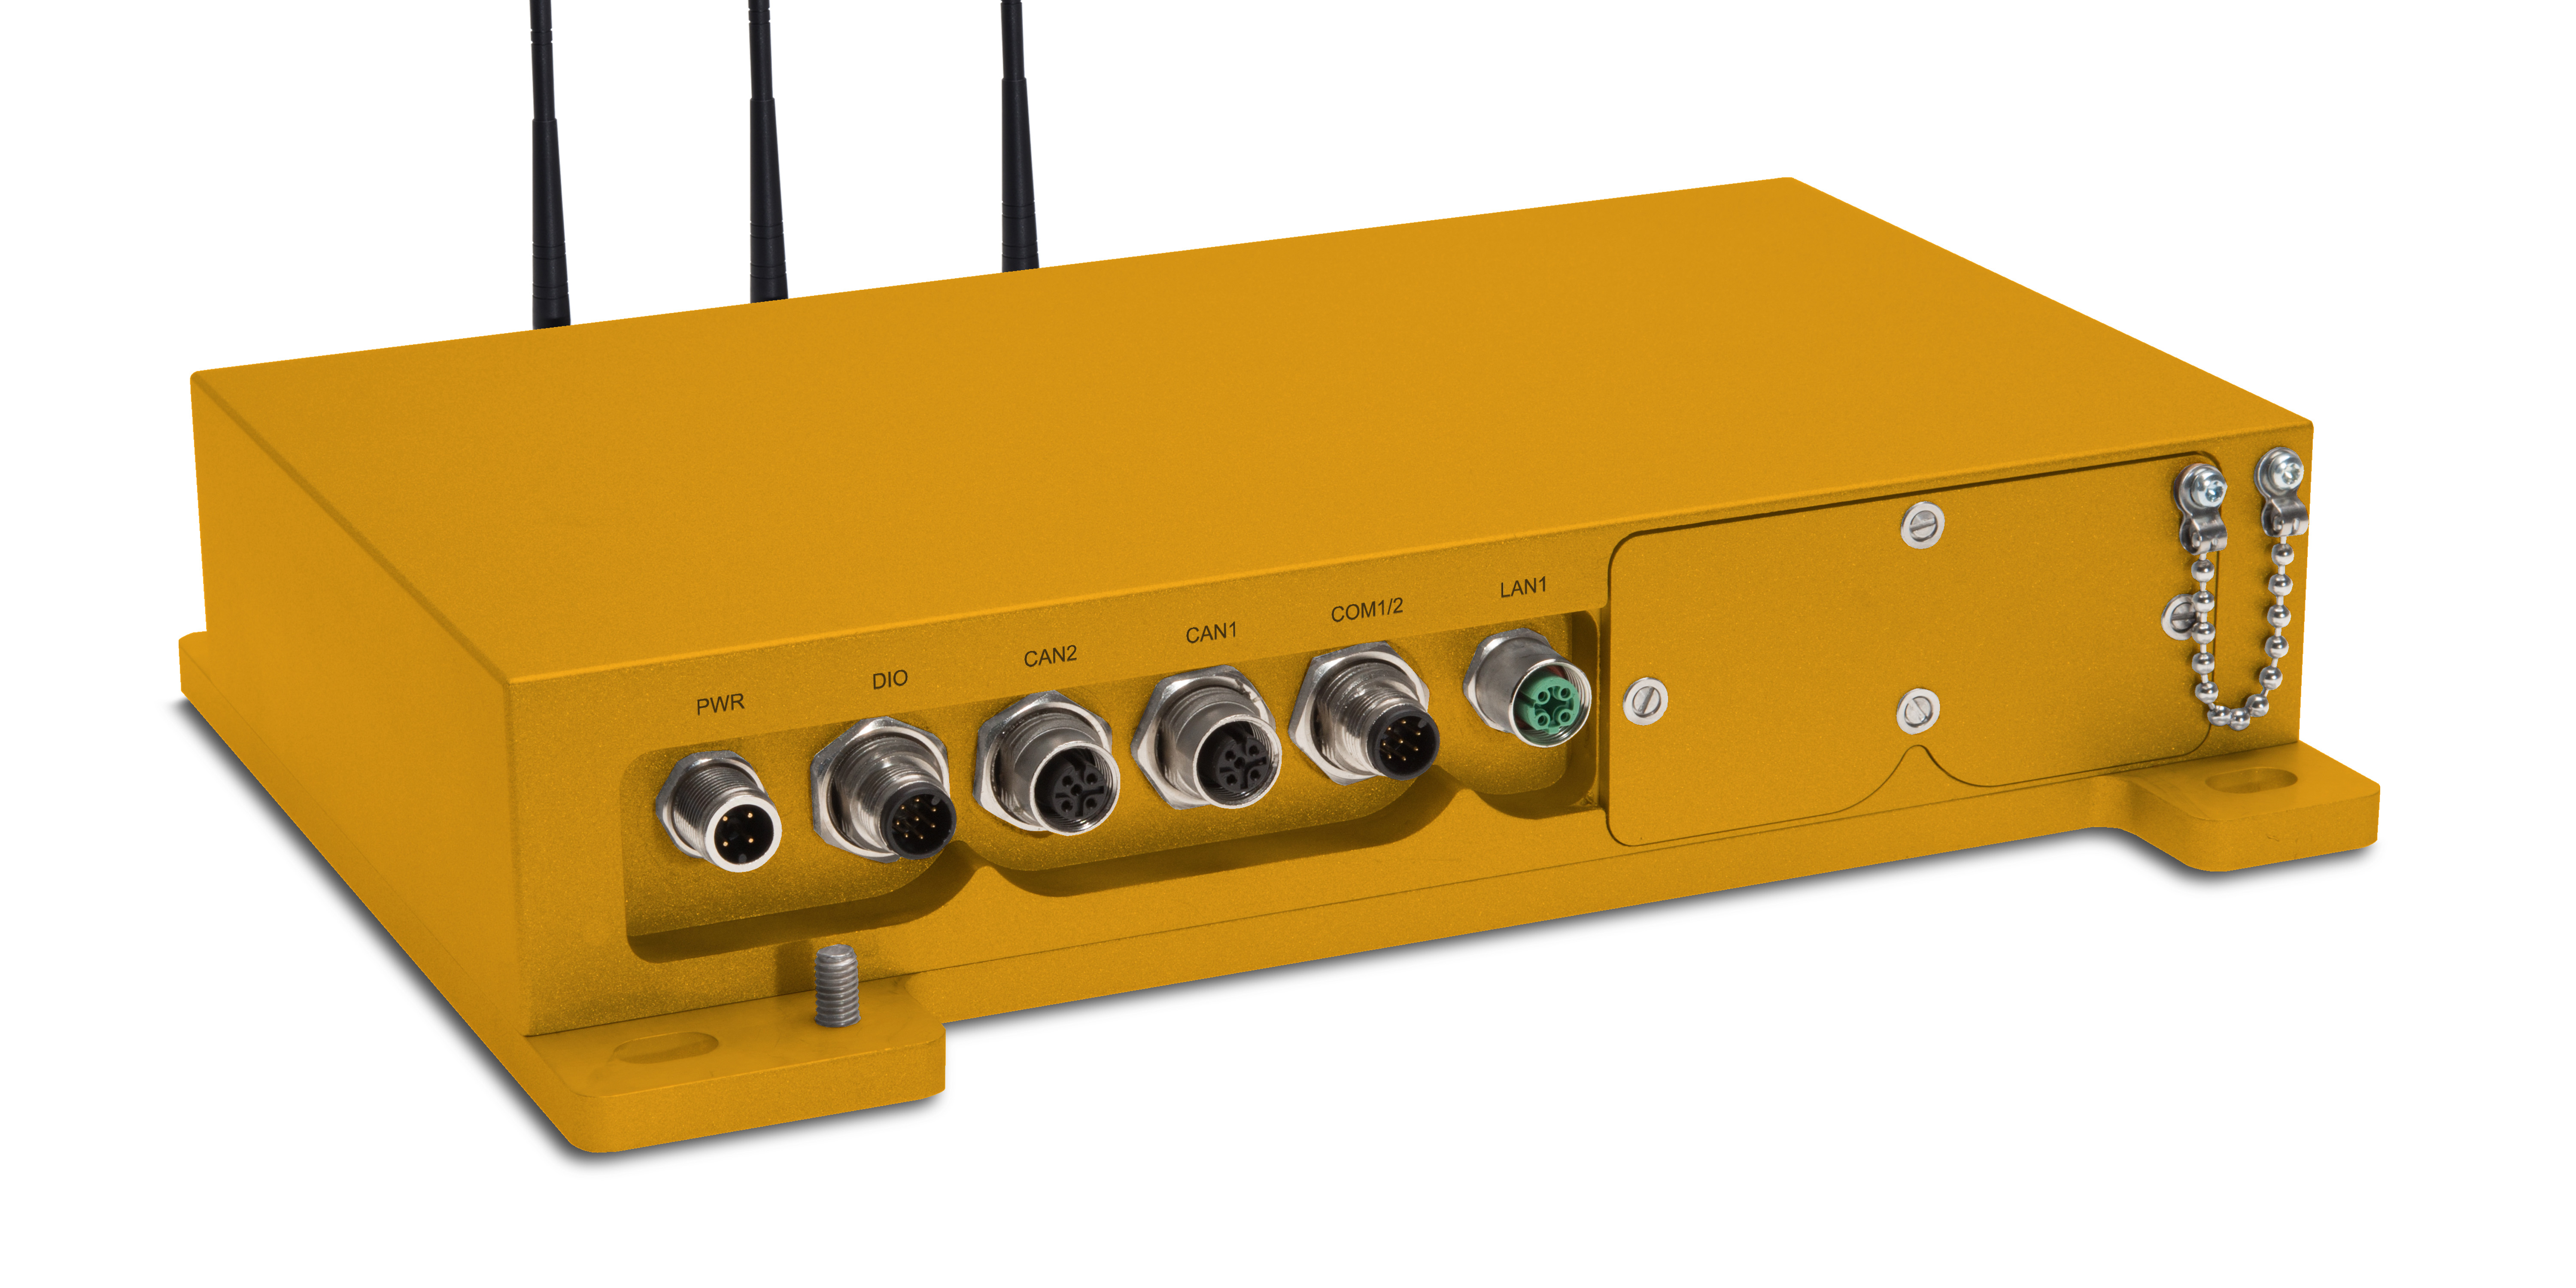 Ruggedized Embedded Box PC for Off-Highway Trucks, Dozers or Track Loaders.